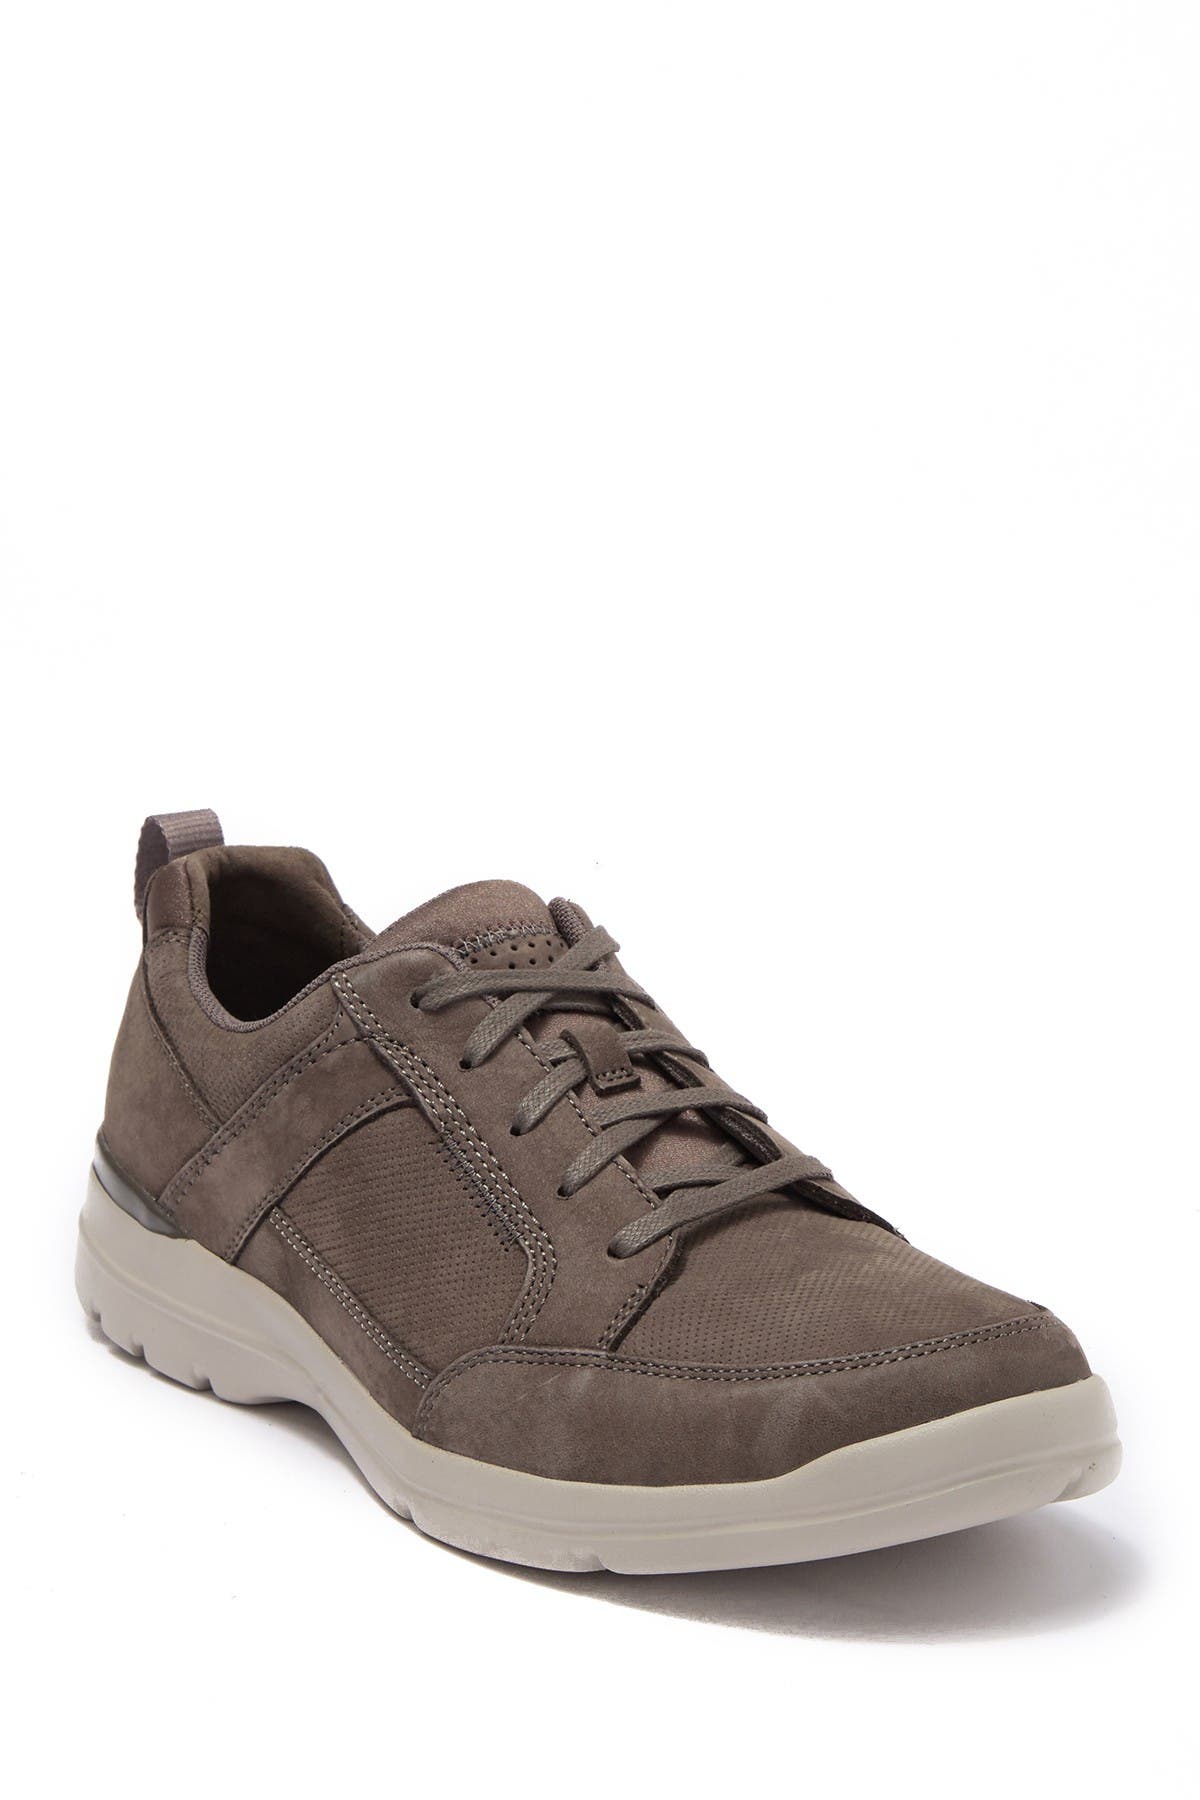 Rockport | City Edge Lace-Up Sneaker 